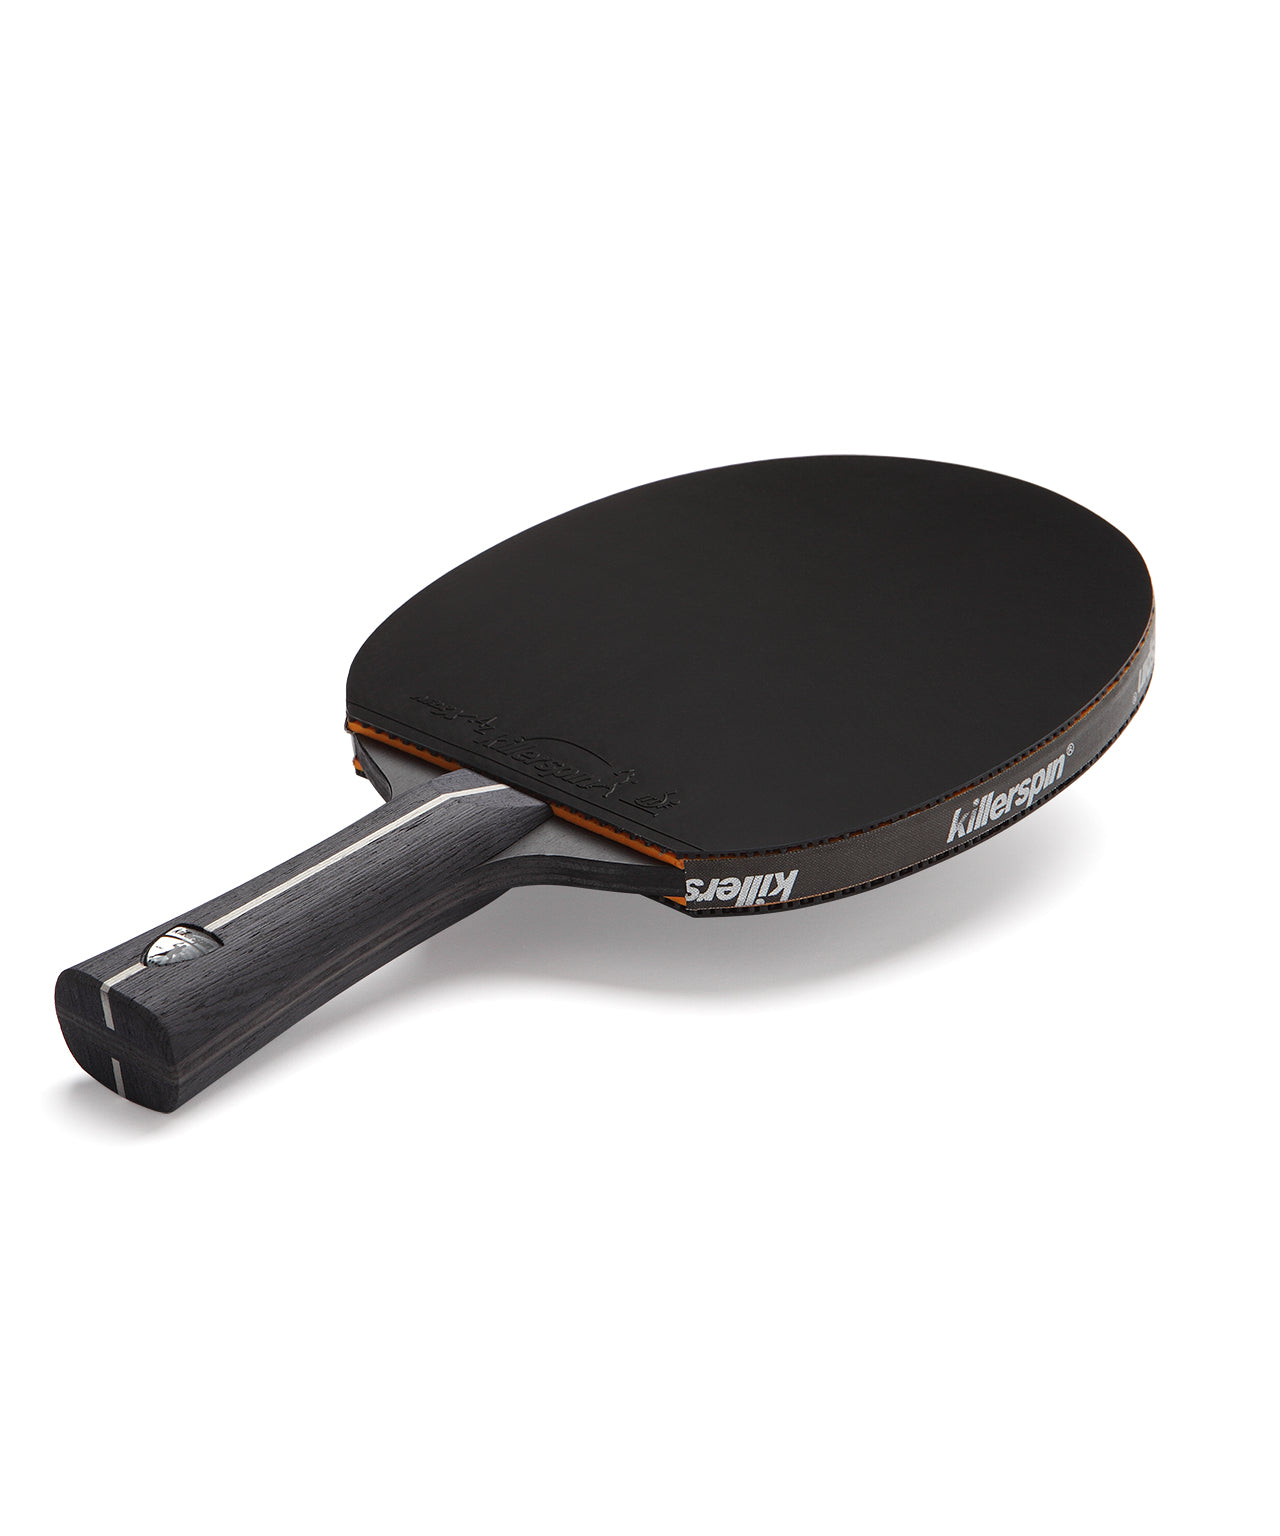 Ping Pong 101: Why Your Ping Pong Paddle Red & Black? Why 2